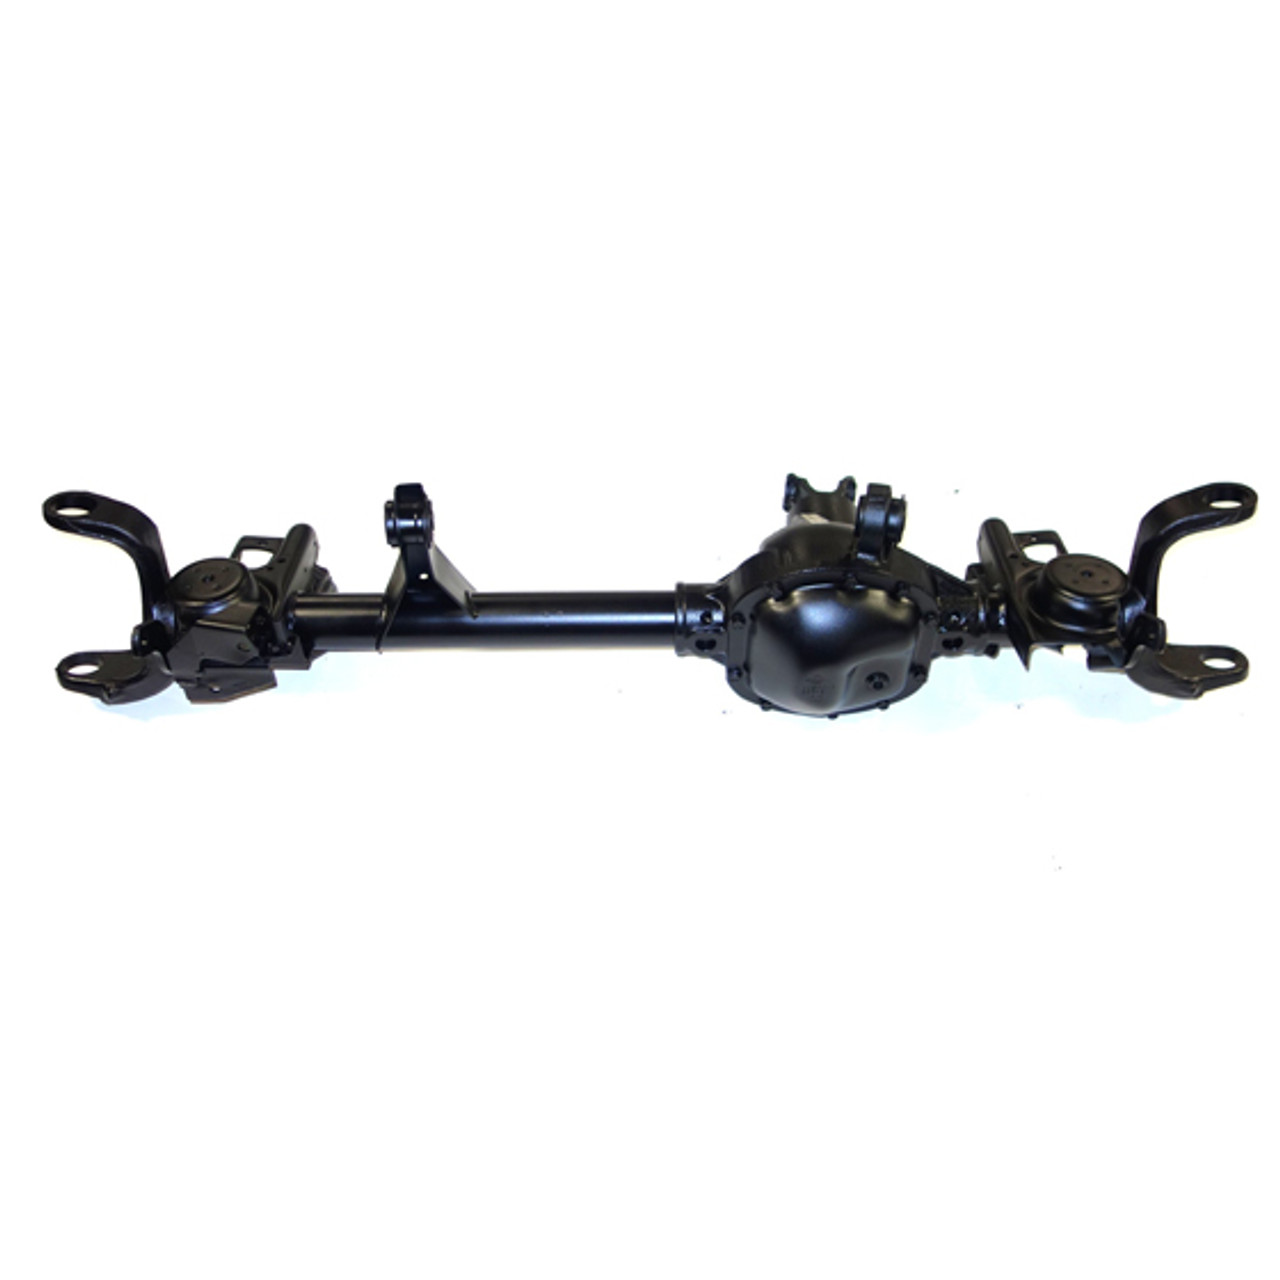 Reman Complete Axle Assembly for Dana 30 97-99 Jeep Wrangler 4.11 Ratio, ABS